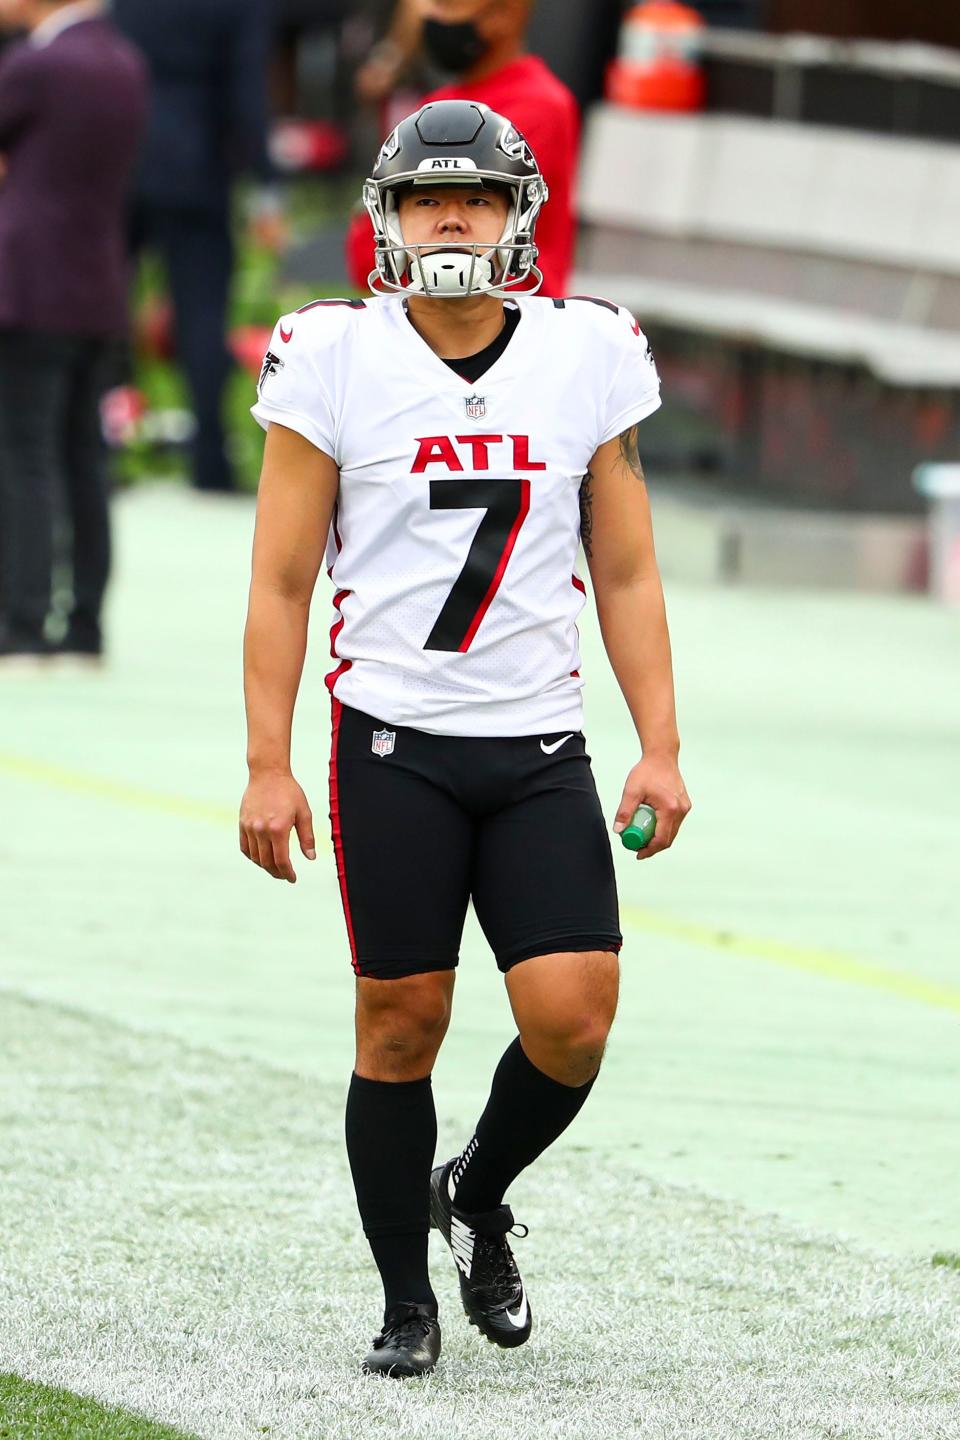 Atlanta Falcons kicker Younghoe Koo (7) looks on prior to an NFL football game against the Tampa Bay Buccaneers, Sunday, Jan. 3, 2021, in Tampa, Fla. (AP Photo/Kevin Sabitus)